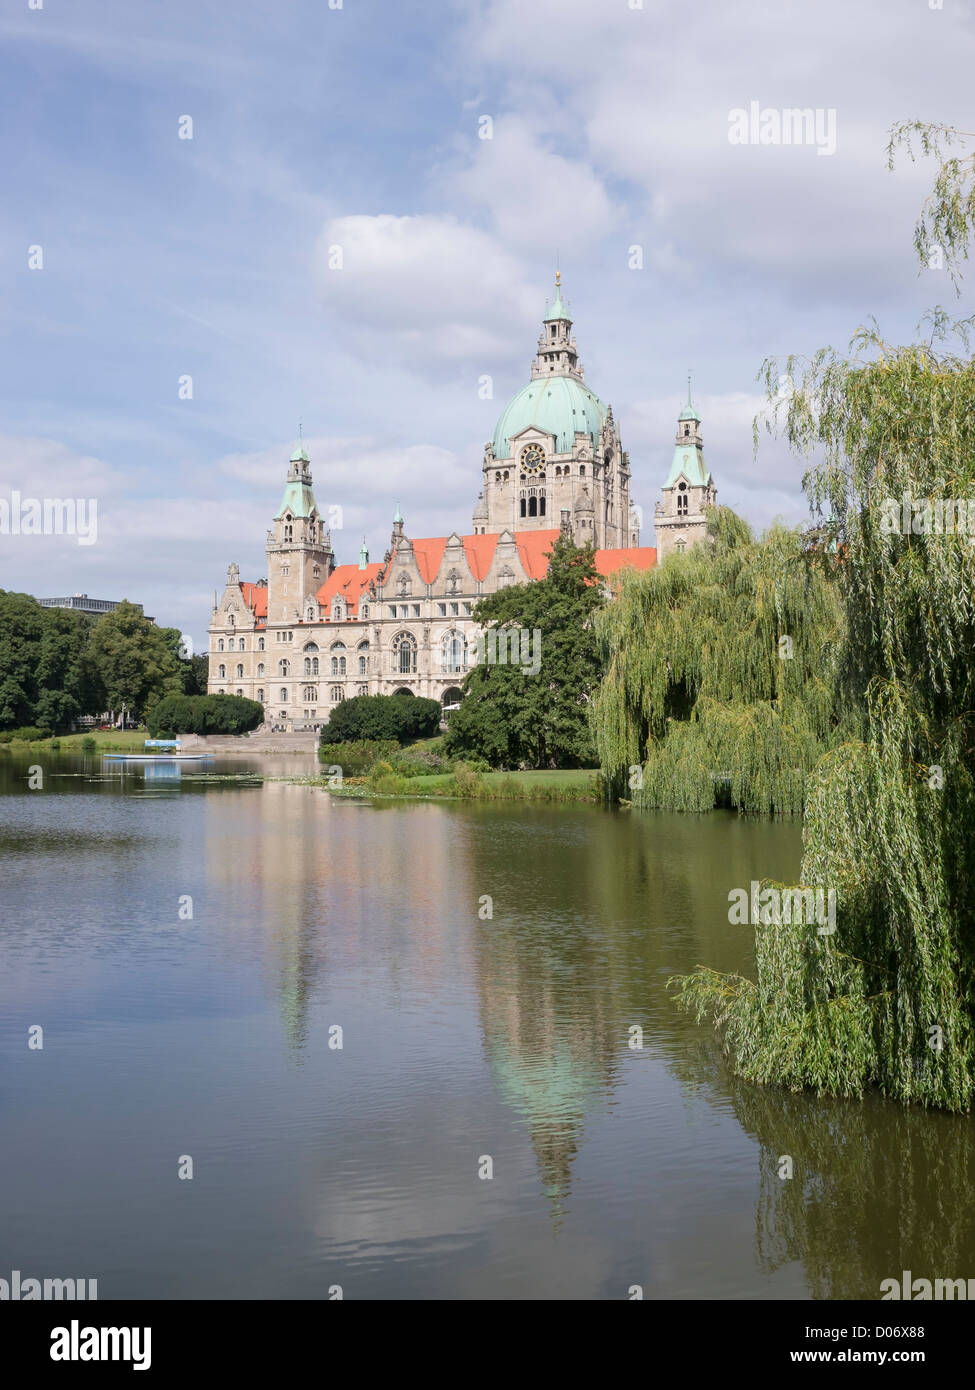 The Neues Rathaus (new city hall) in Hannover, Germany. It is set in a public park with trees and a large lake. Stock Photo